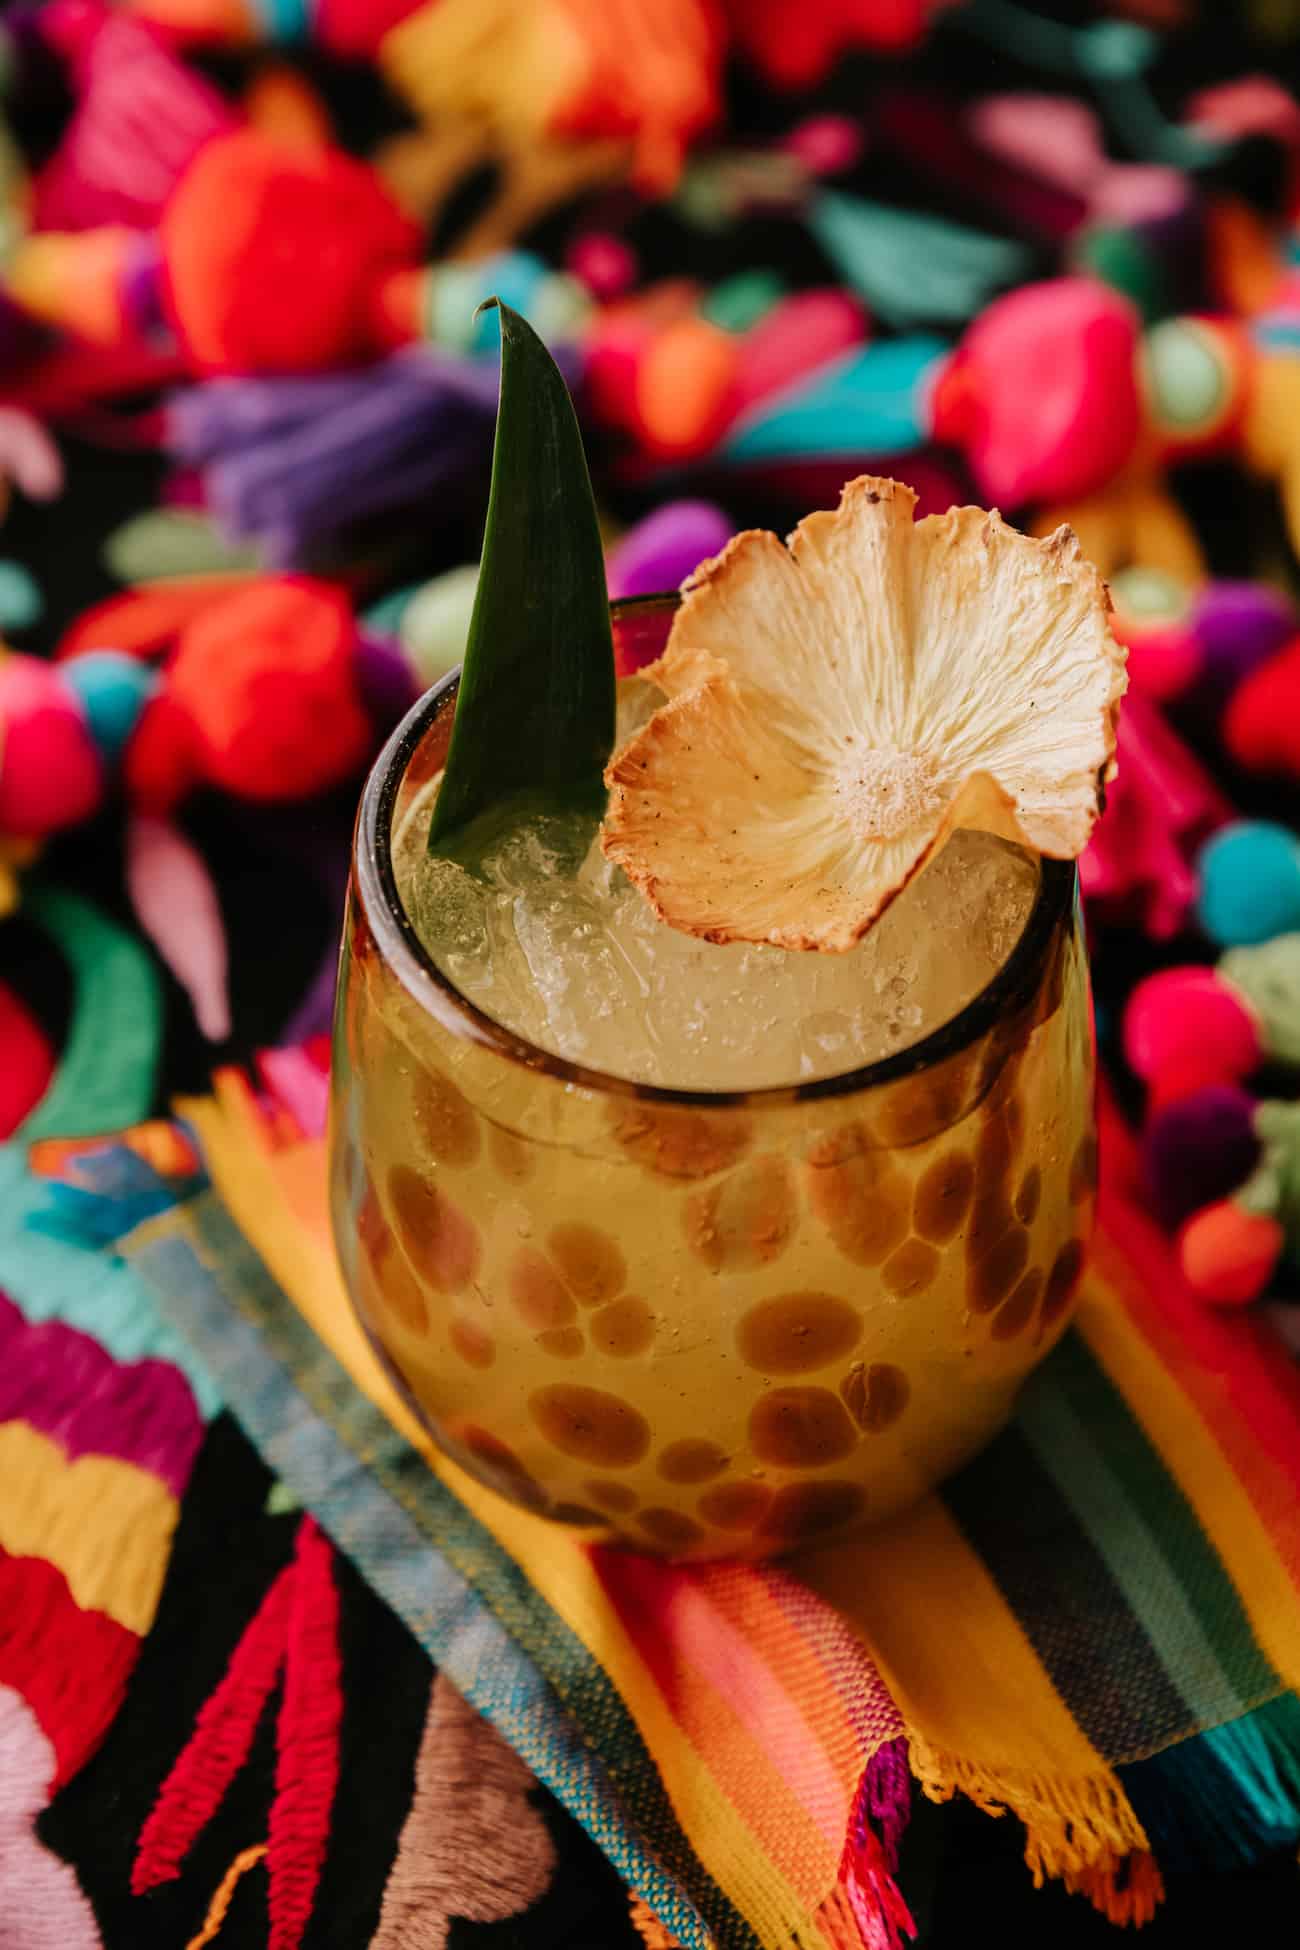 Flor de Pina cocktail in a speckled amber glass on a colorful patterned background garnished with a dried pineapple flower and a pineapple leaf.